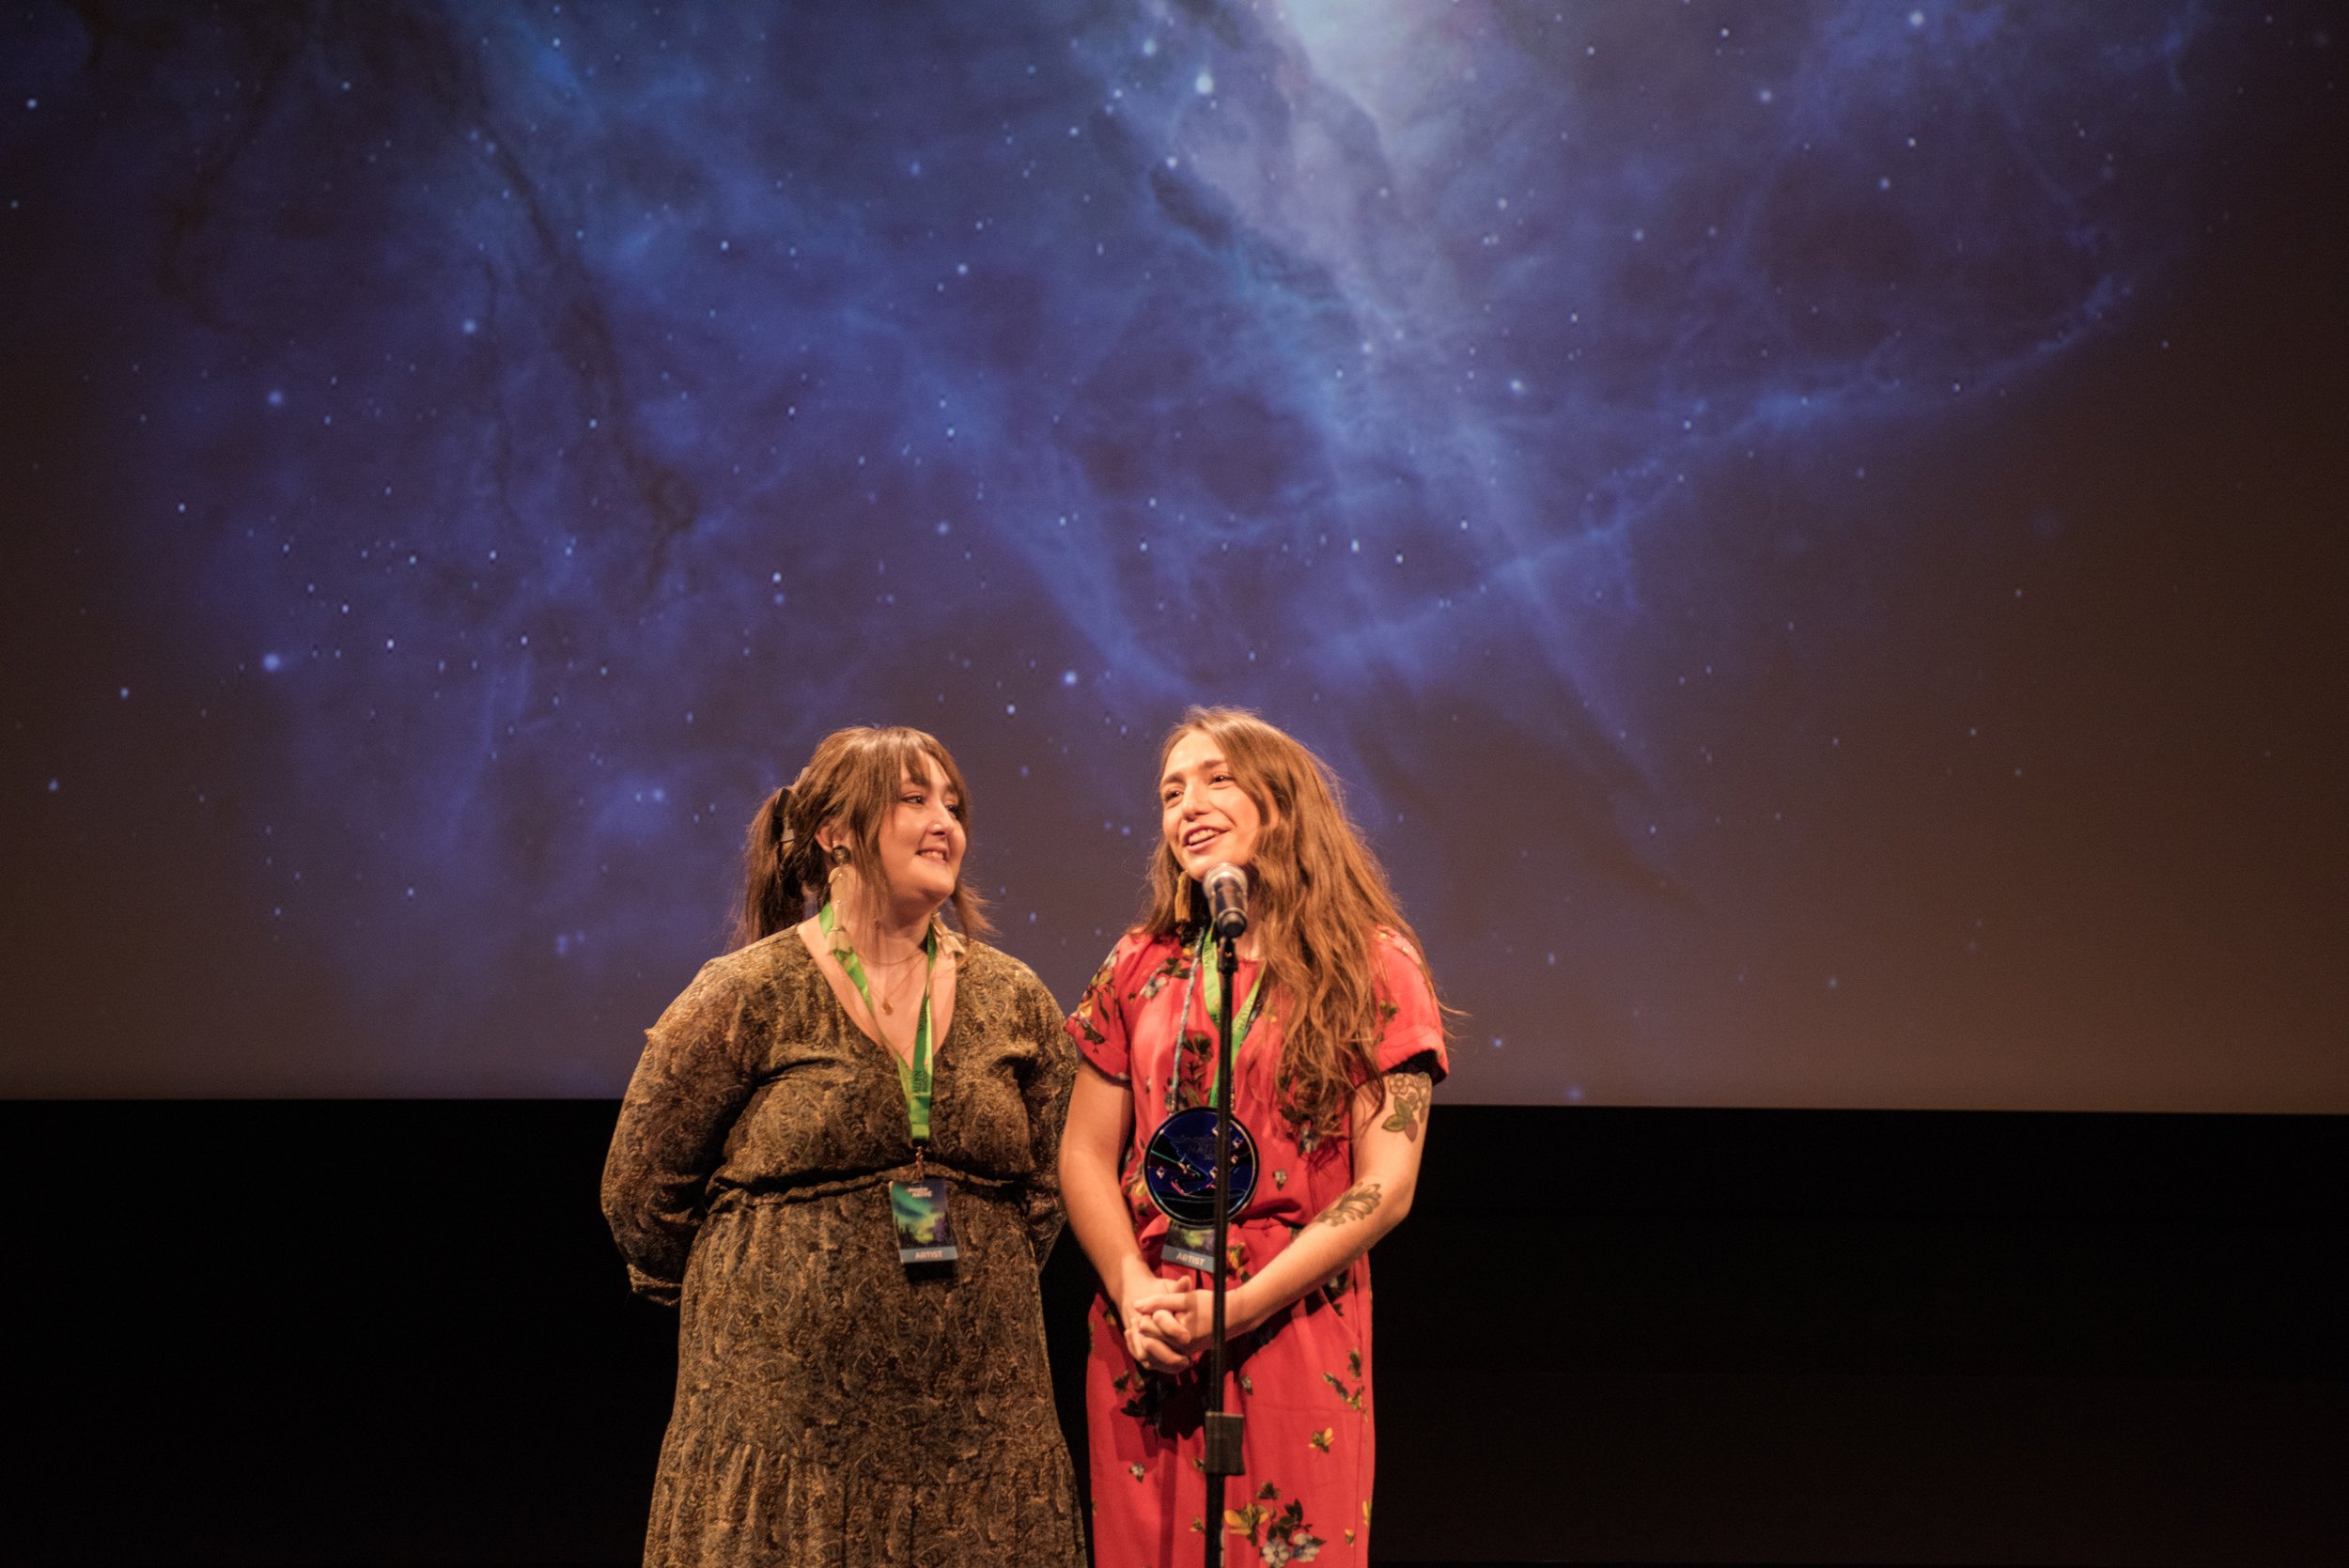 Keara &amp; Caeleigh Lightning accepting the New Artist in Digital + Interactive Award for their game “Mikiwam.” Image by Pengkuei Ben Huang.